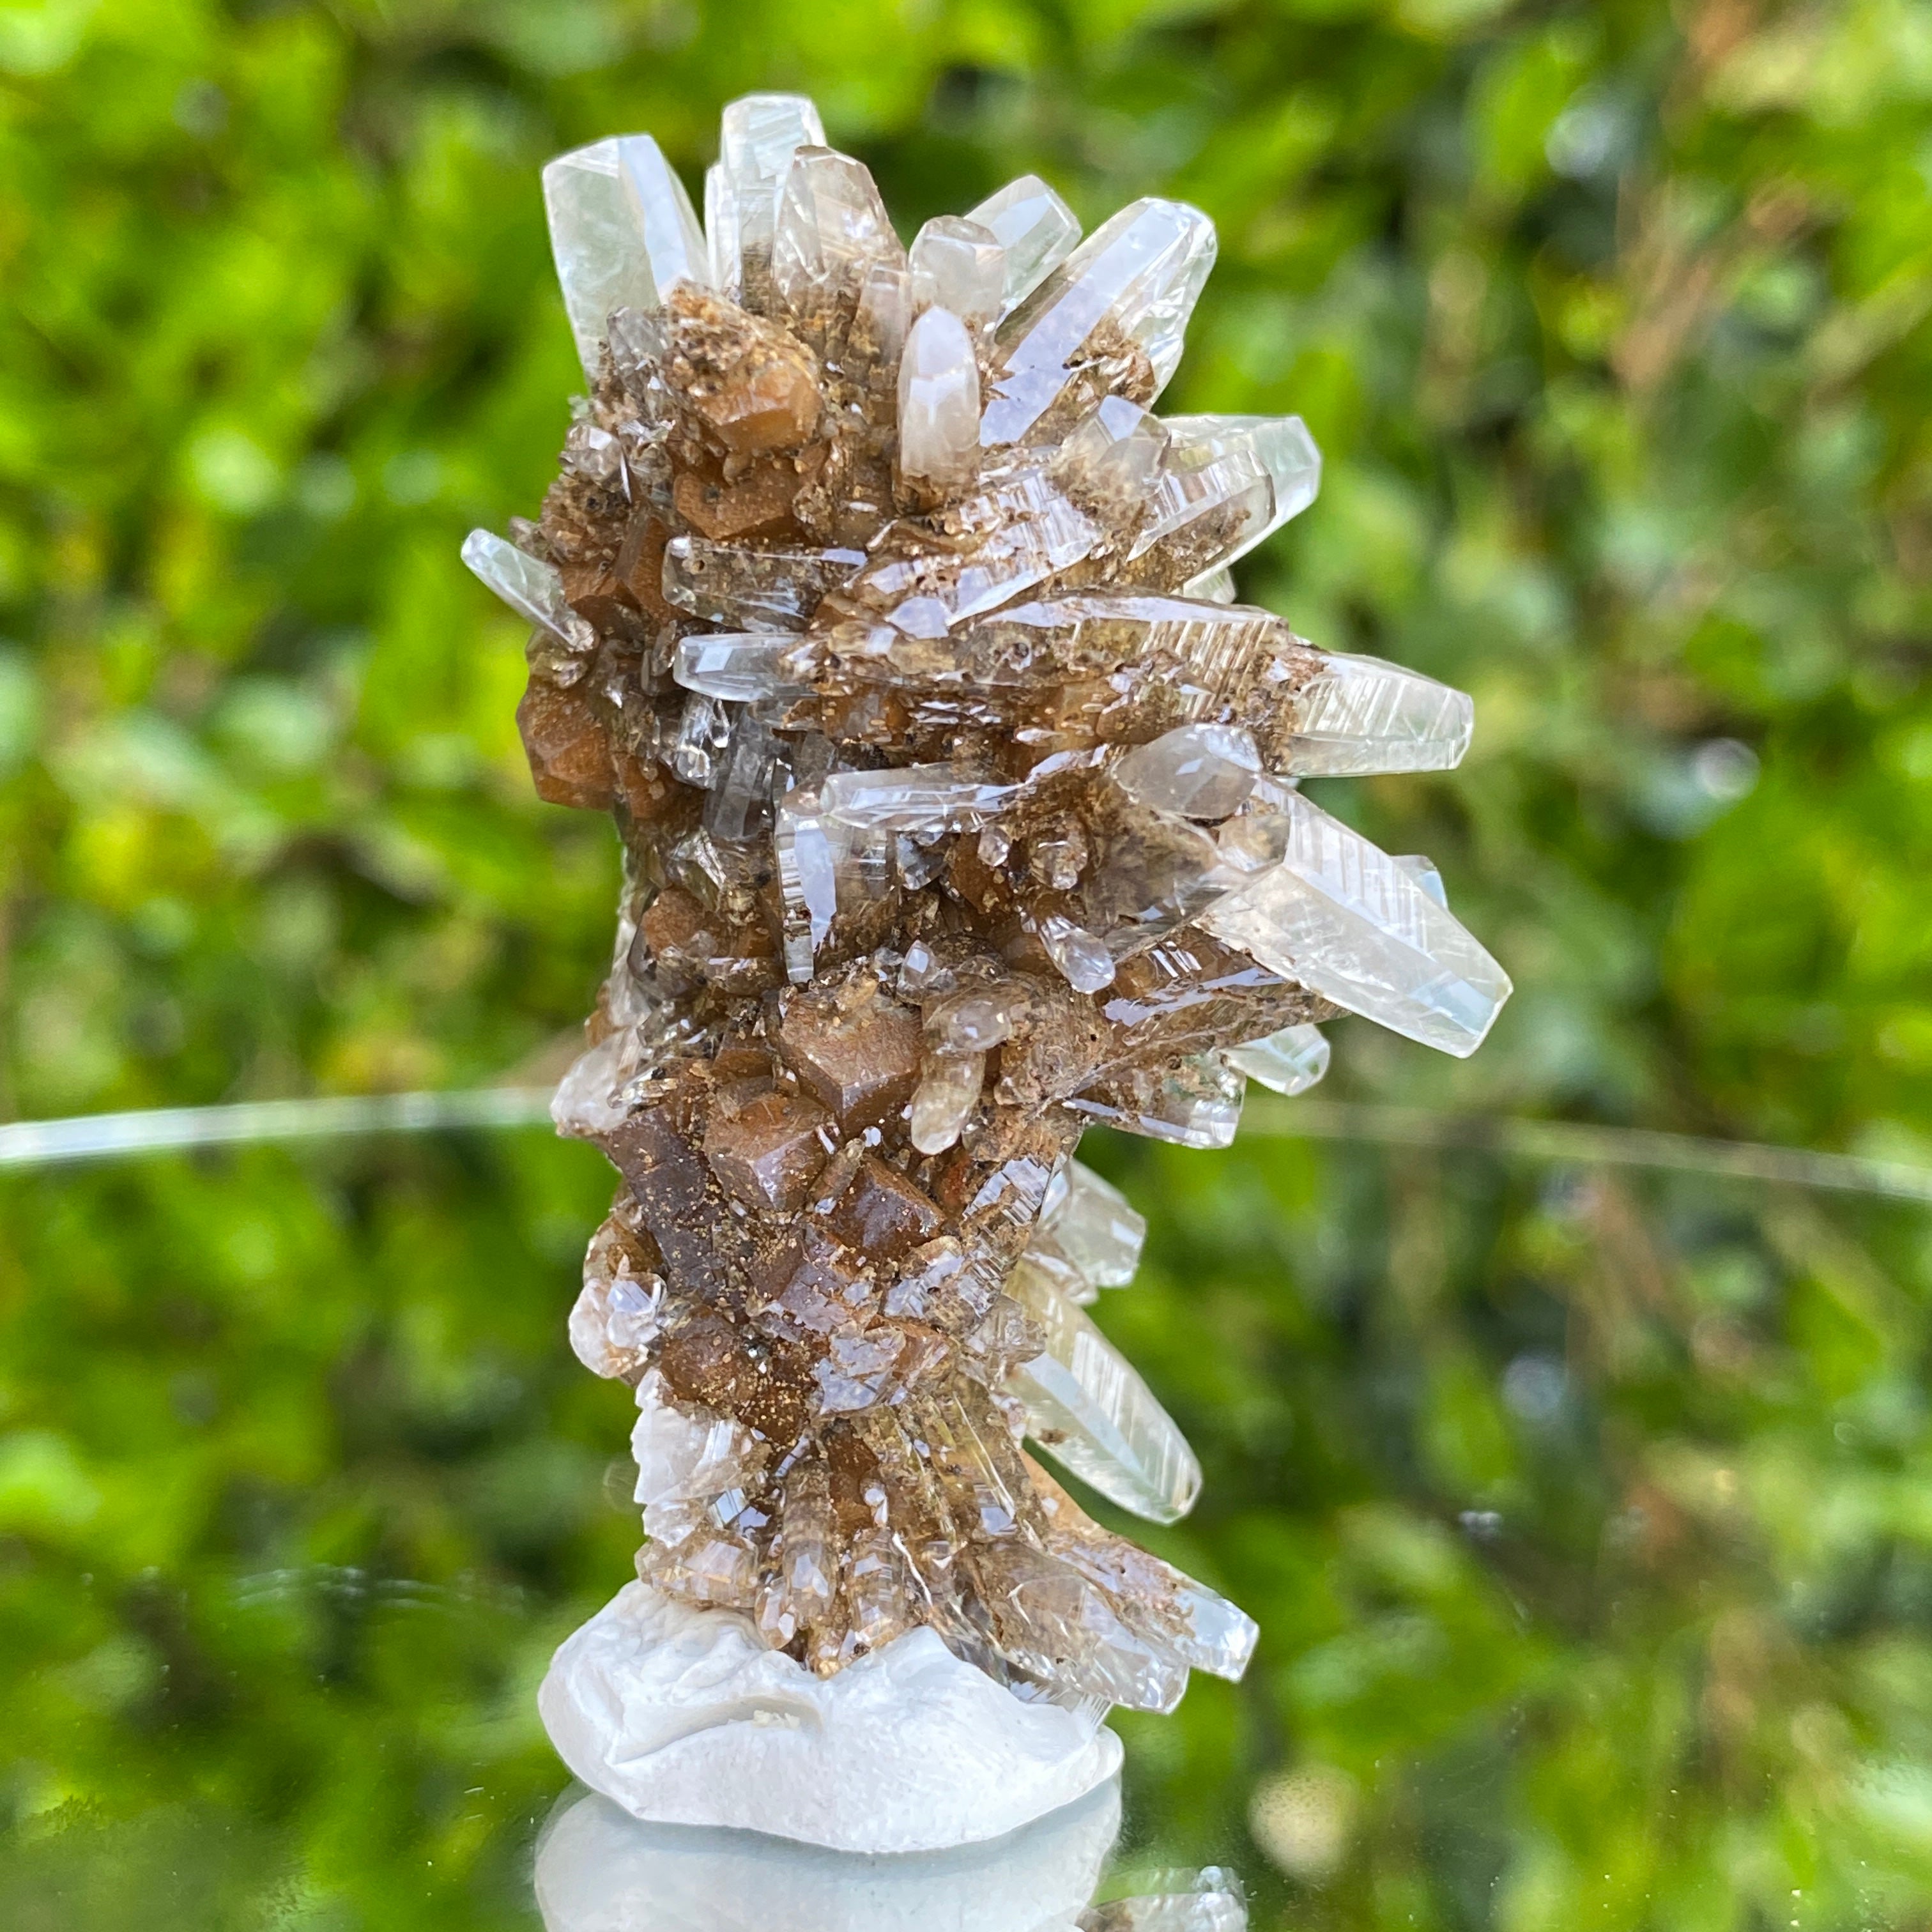 46g 6x4x4cm Clear Calcite from Fujian,China